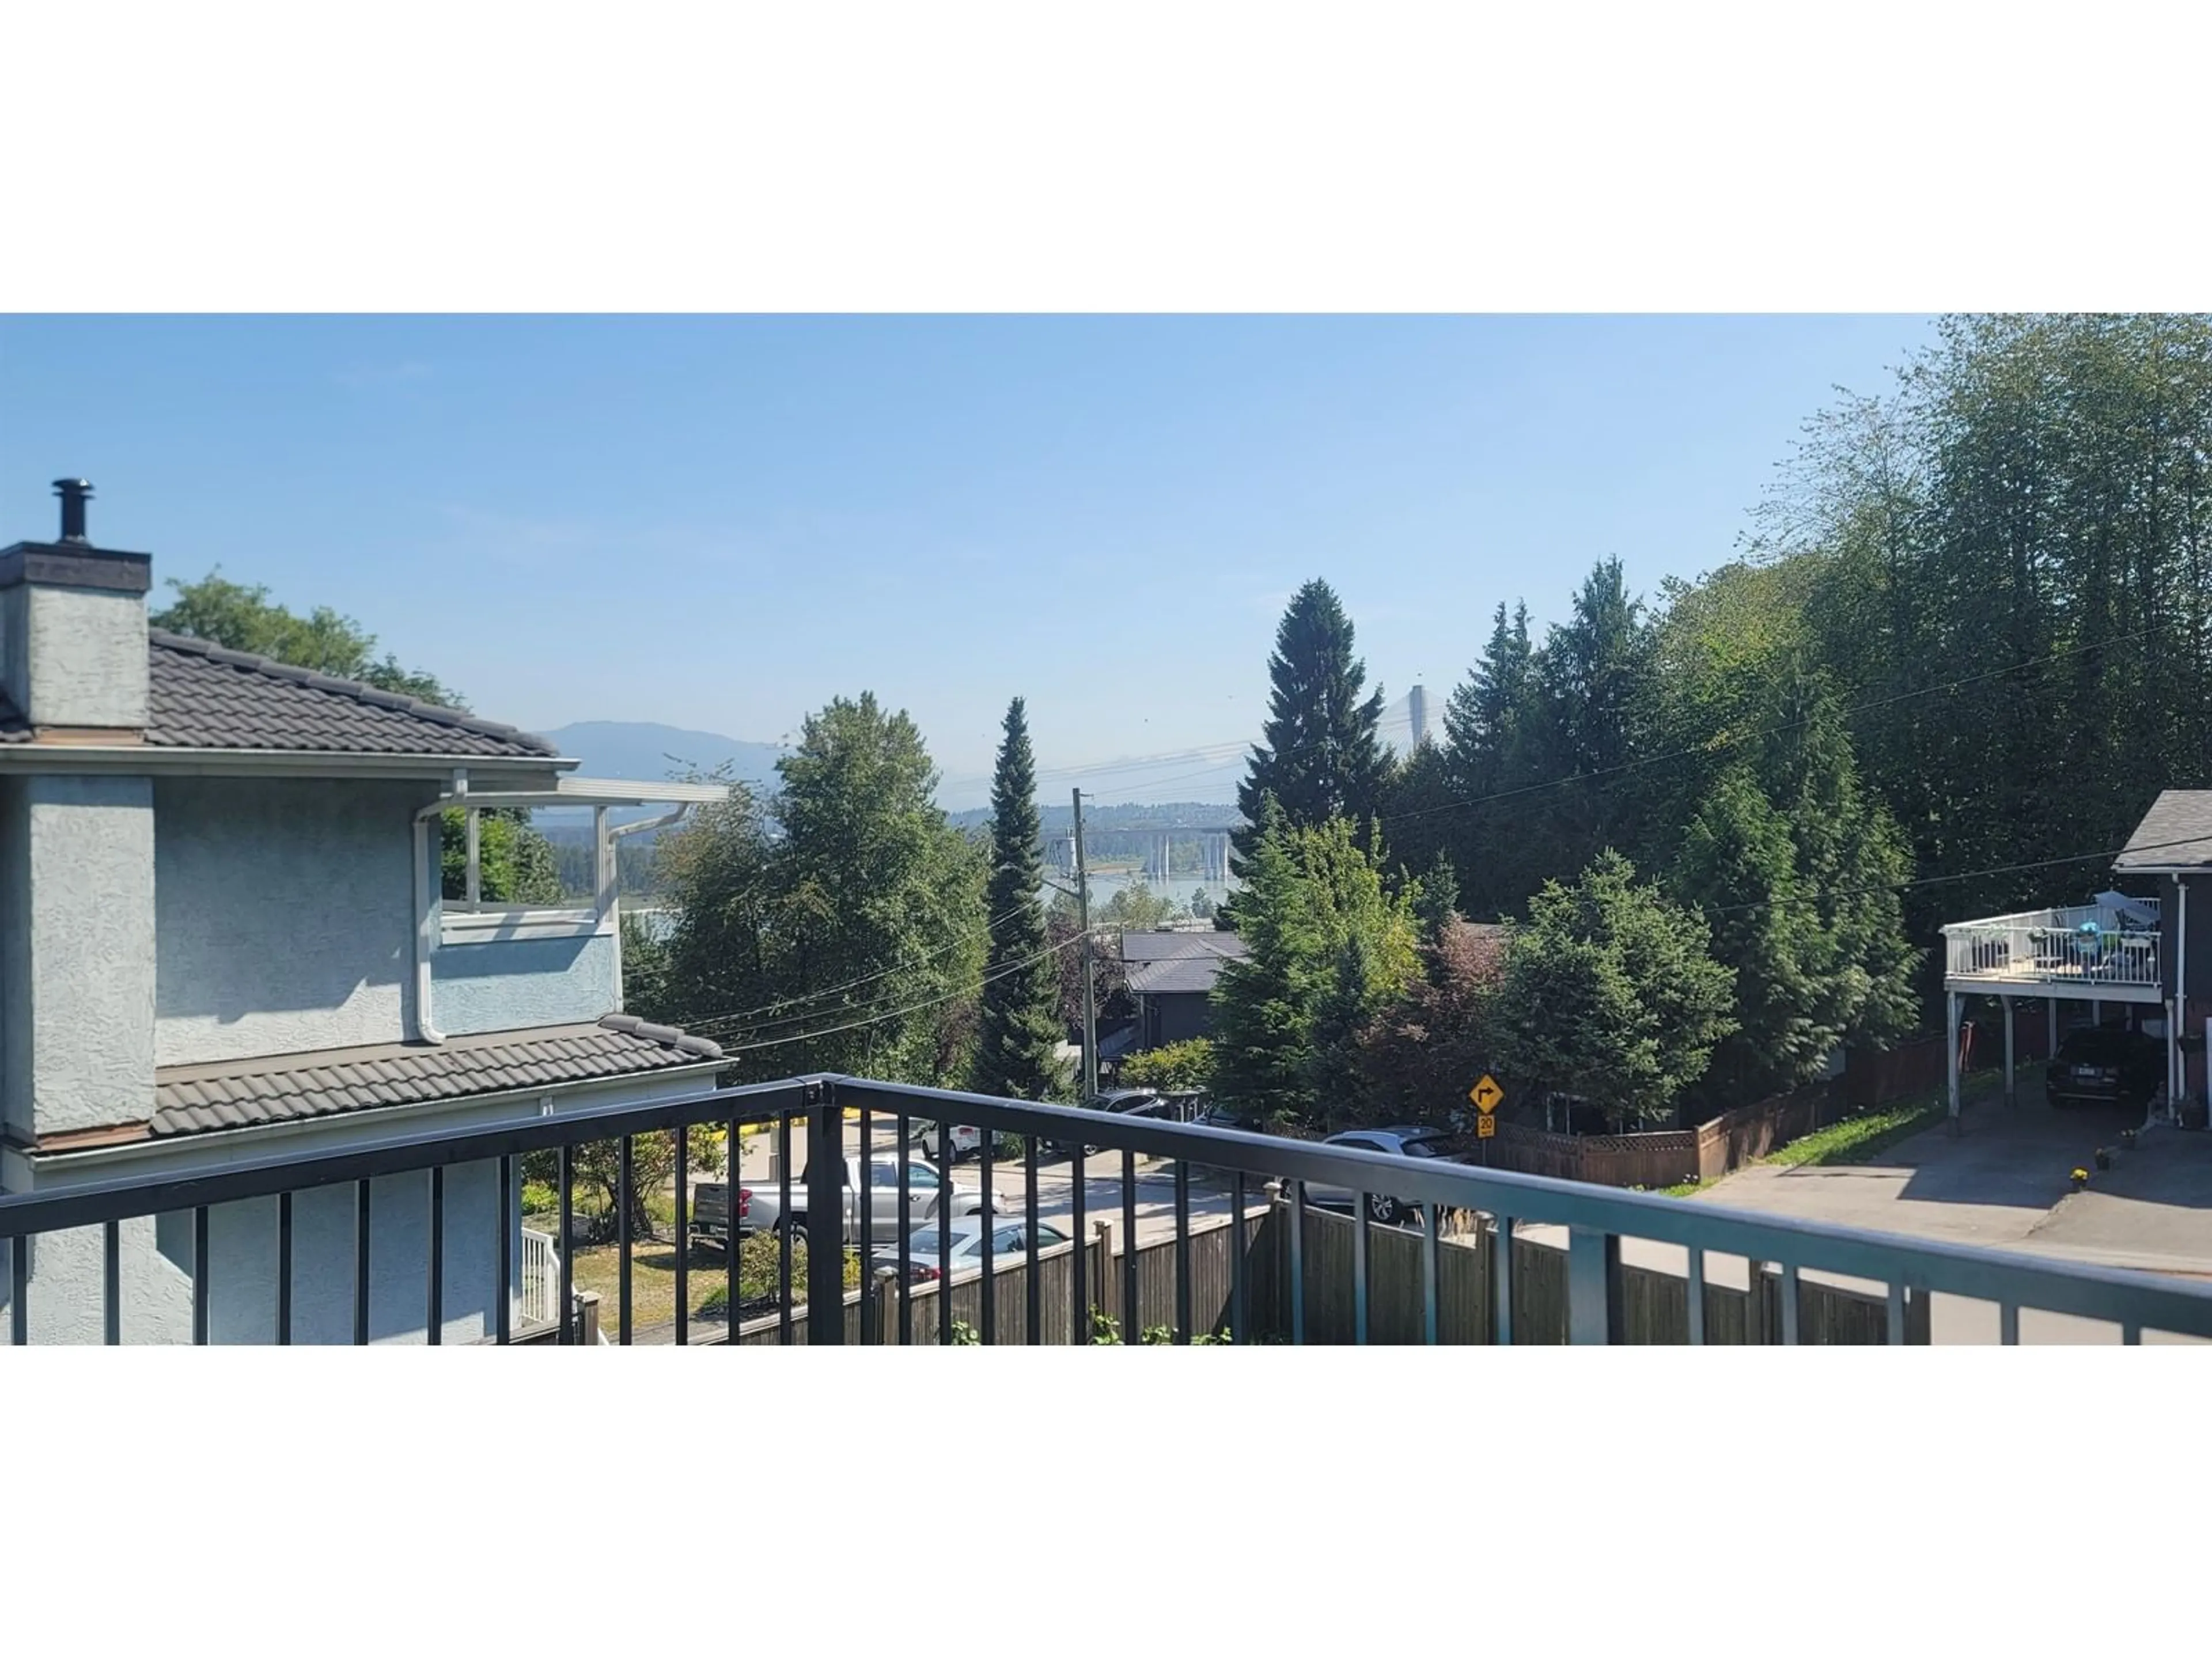 Lakeview for 14169 115A AVENUE, Surrey British Columbia V3R2R6